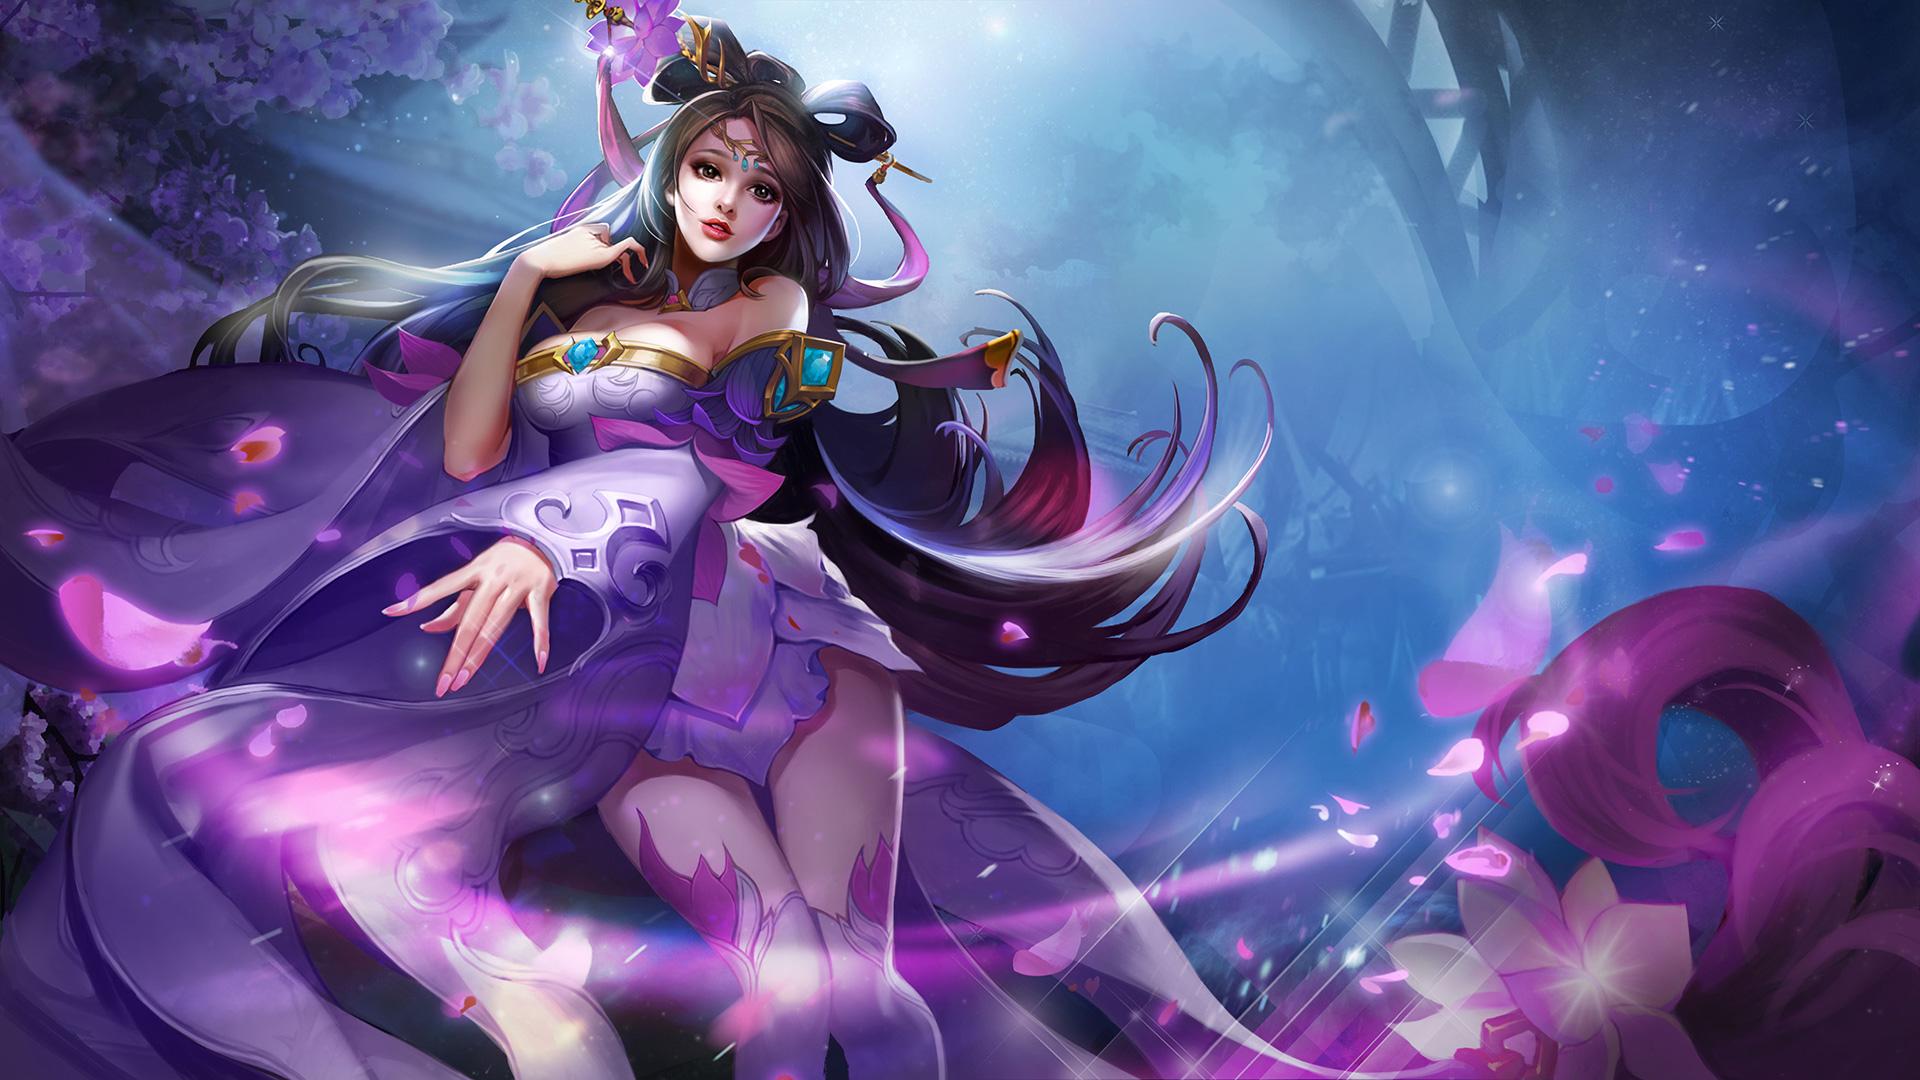 King Of Glory Diao Chan Master Purple Clothes Hd Wallpaper For Desktop 